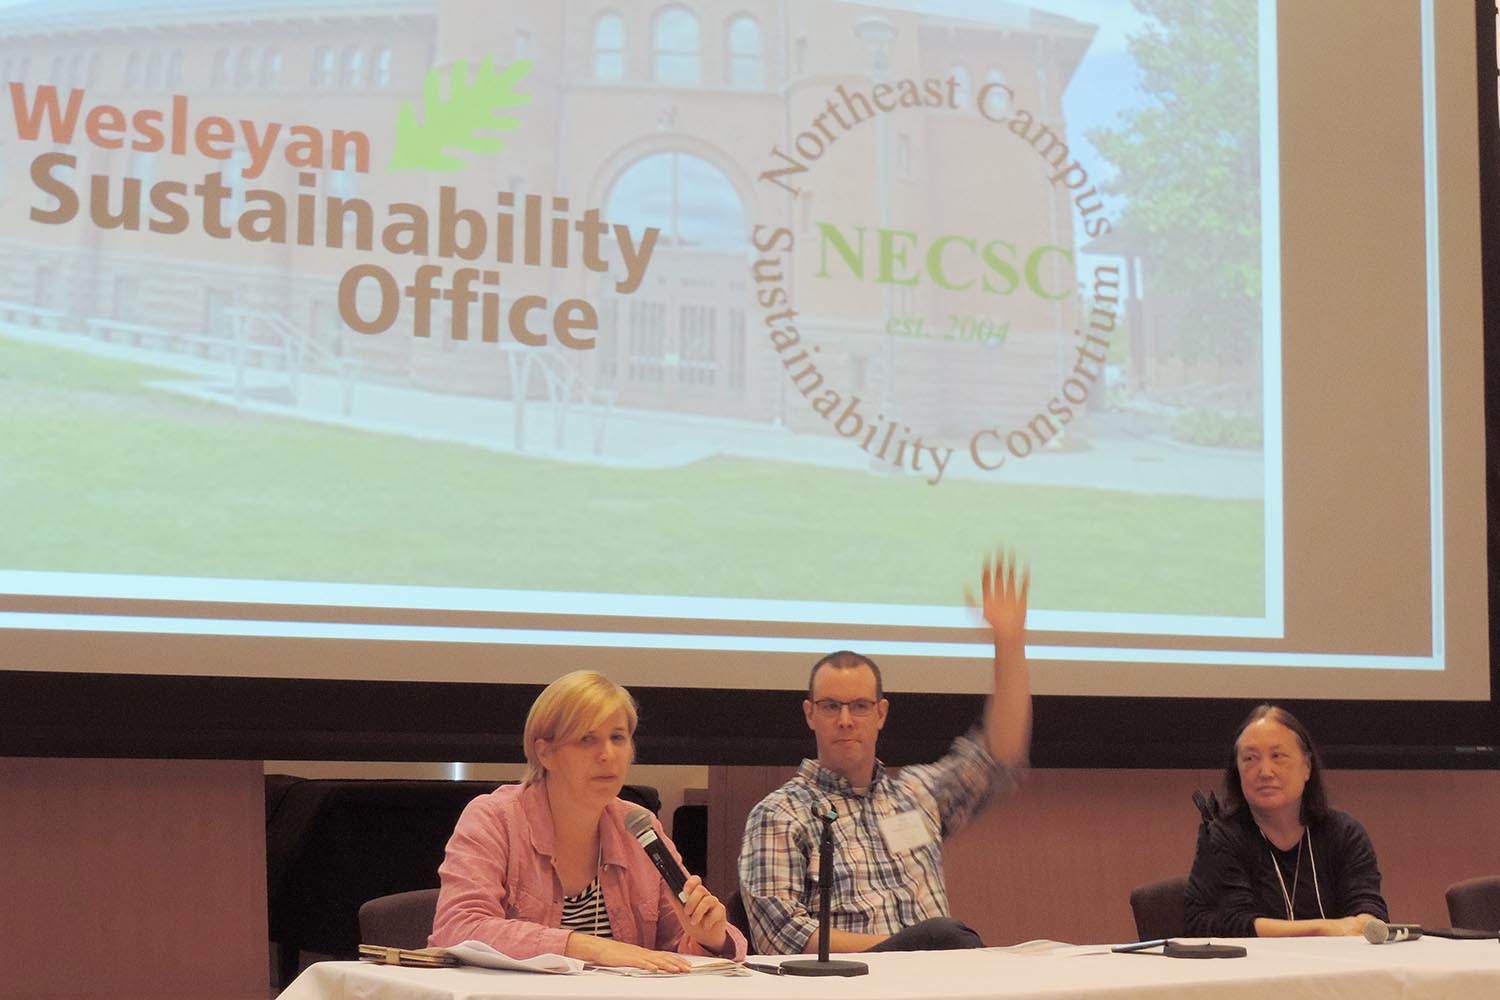 Valerie Nye, director of financial services; Jeff Murphy, facilities business manager; and Joyce Jacobsen, provost and vice president for academic affairs, participated on a panel focused on the theme "How to effect meaningful change by working with senior leaders."